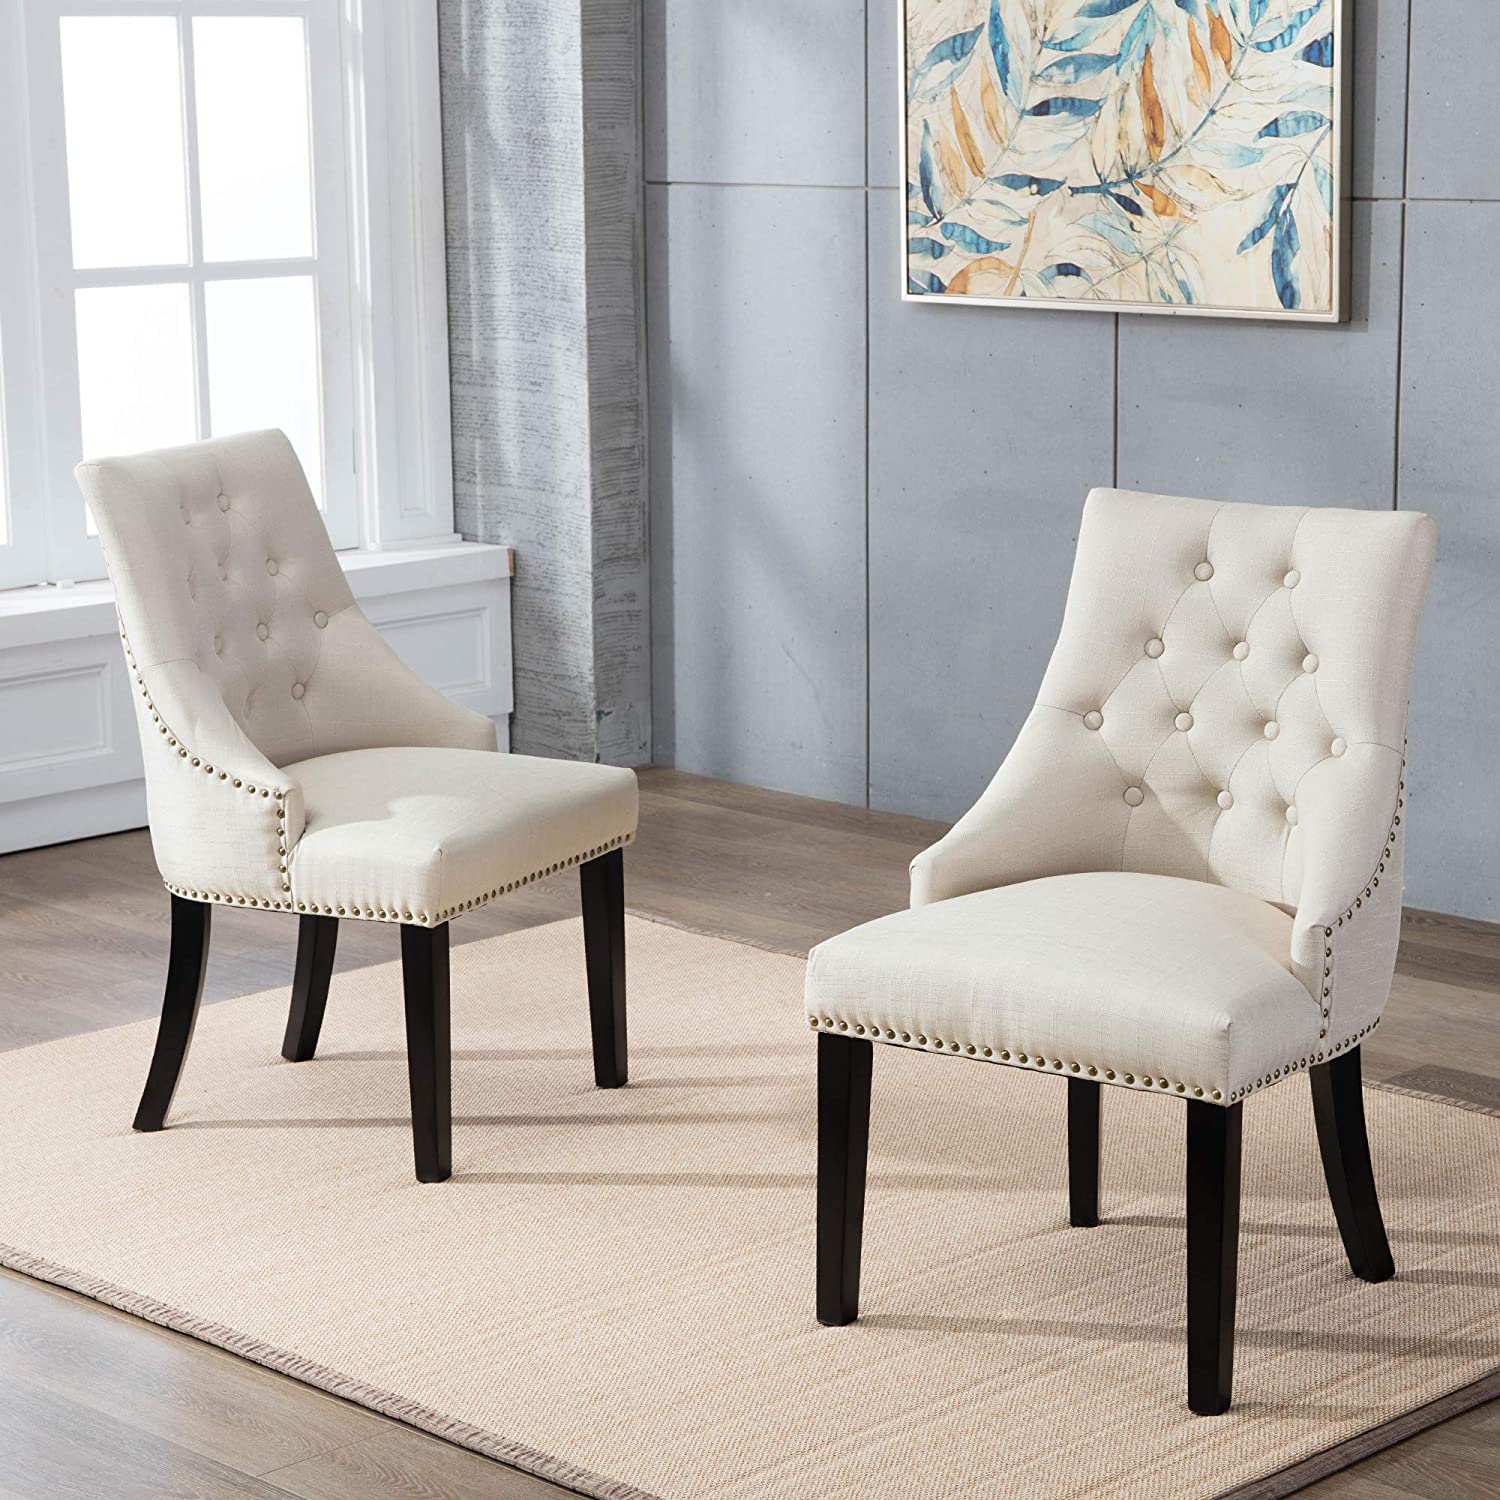 DAGONHIL Fabric Dining Accent Chairs